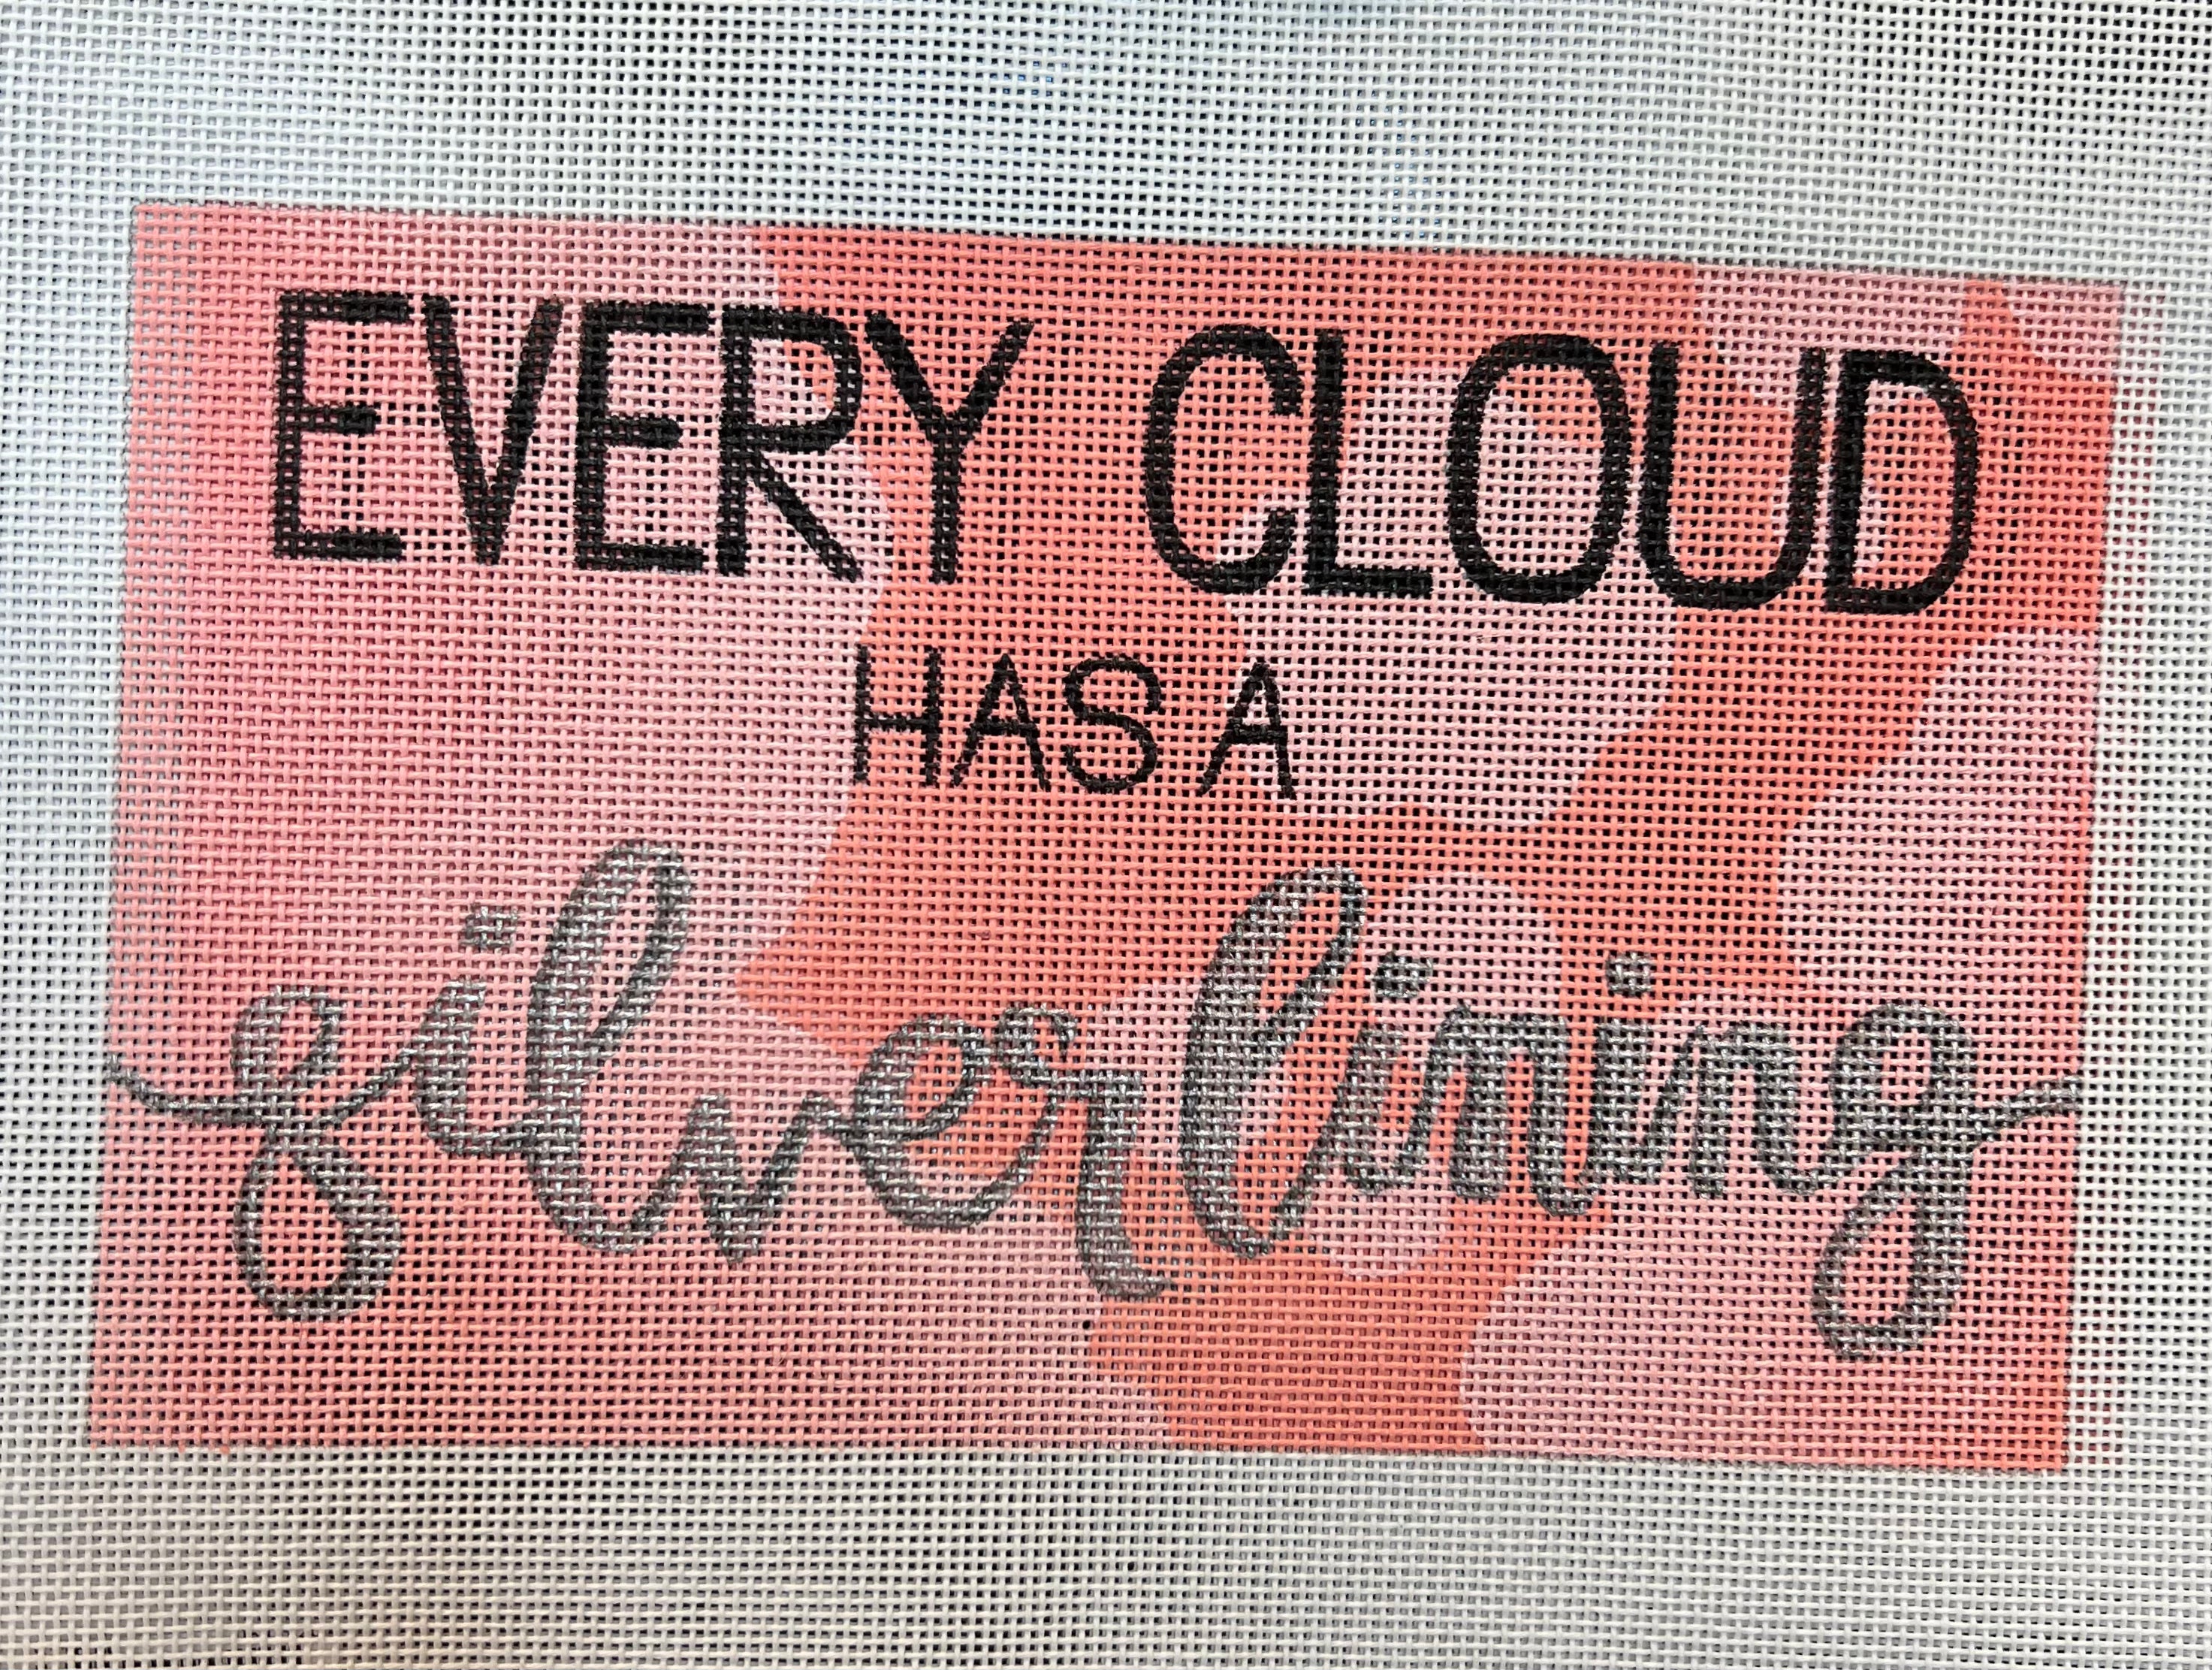 Every Cloud Has a Silver Lining me-30